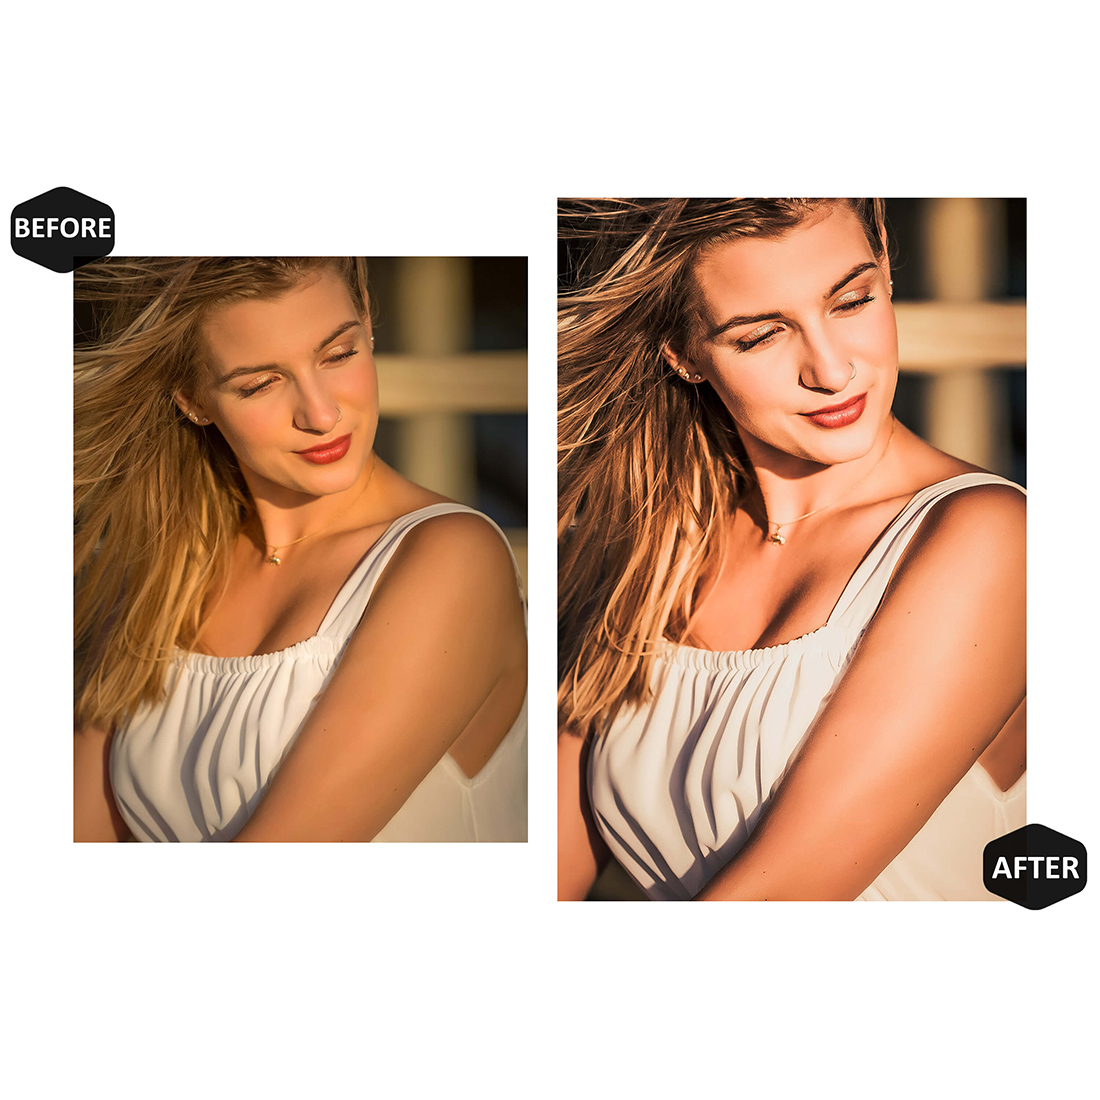 10 Photoshop Actions, Golden Hour Ps Action, Sunset ACR Preset, Sunshine Ps Filter, Atn Portrait And Lifestyle Theme For Instagram, Blogger preview image.